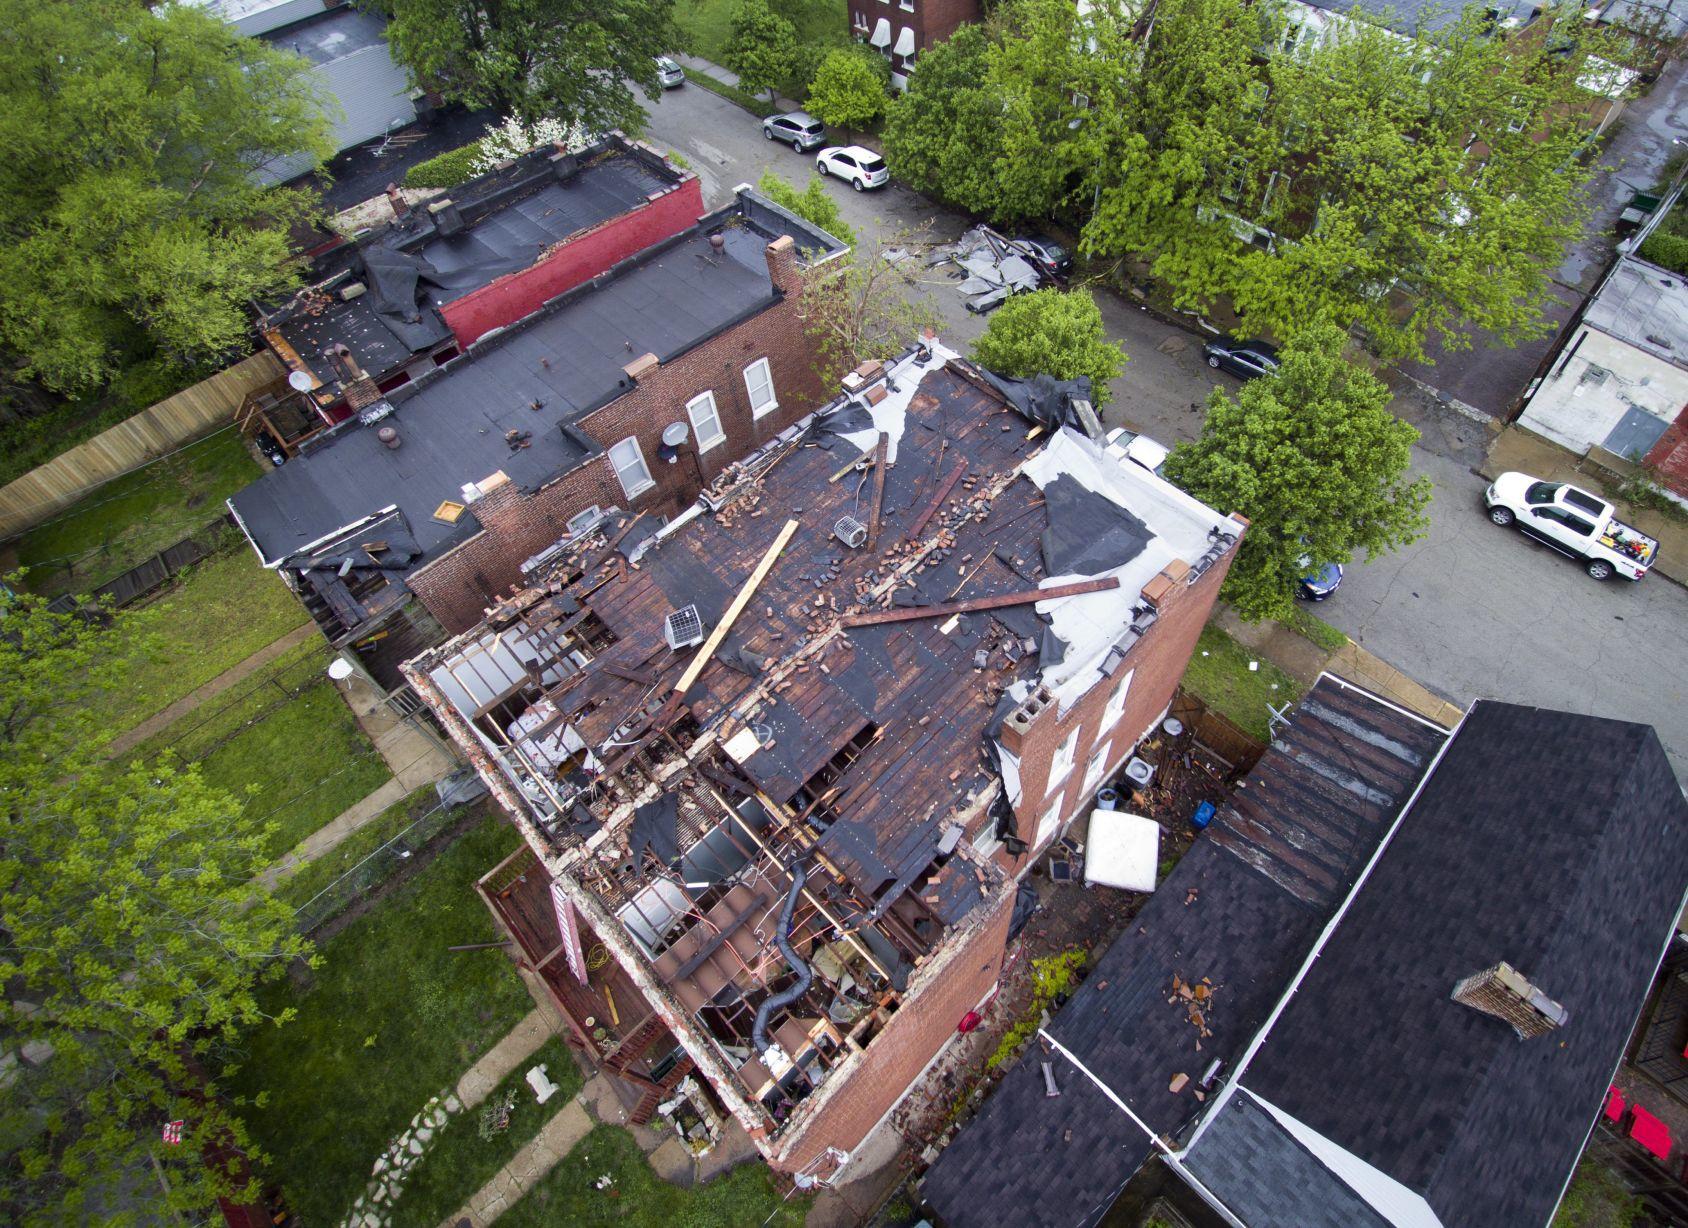 Storm damage in St. Louis from Tuesday's storm